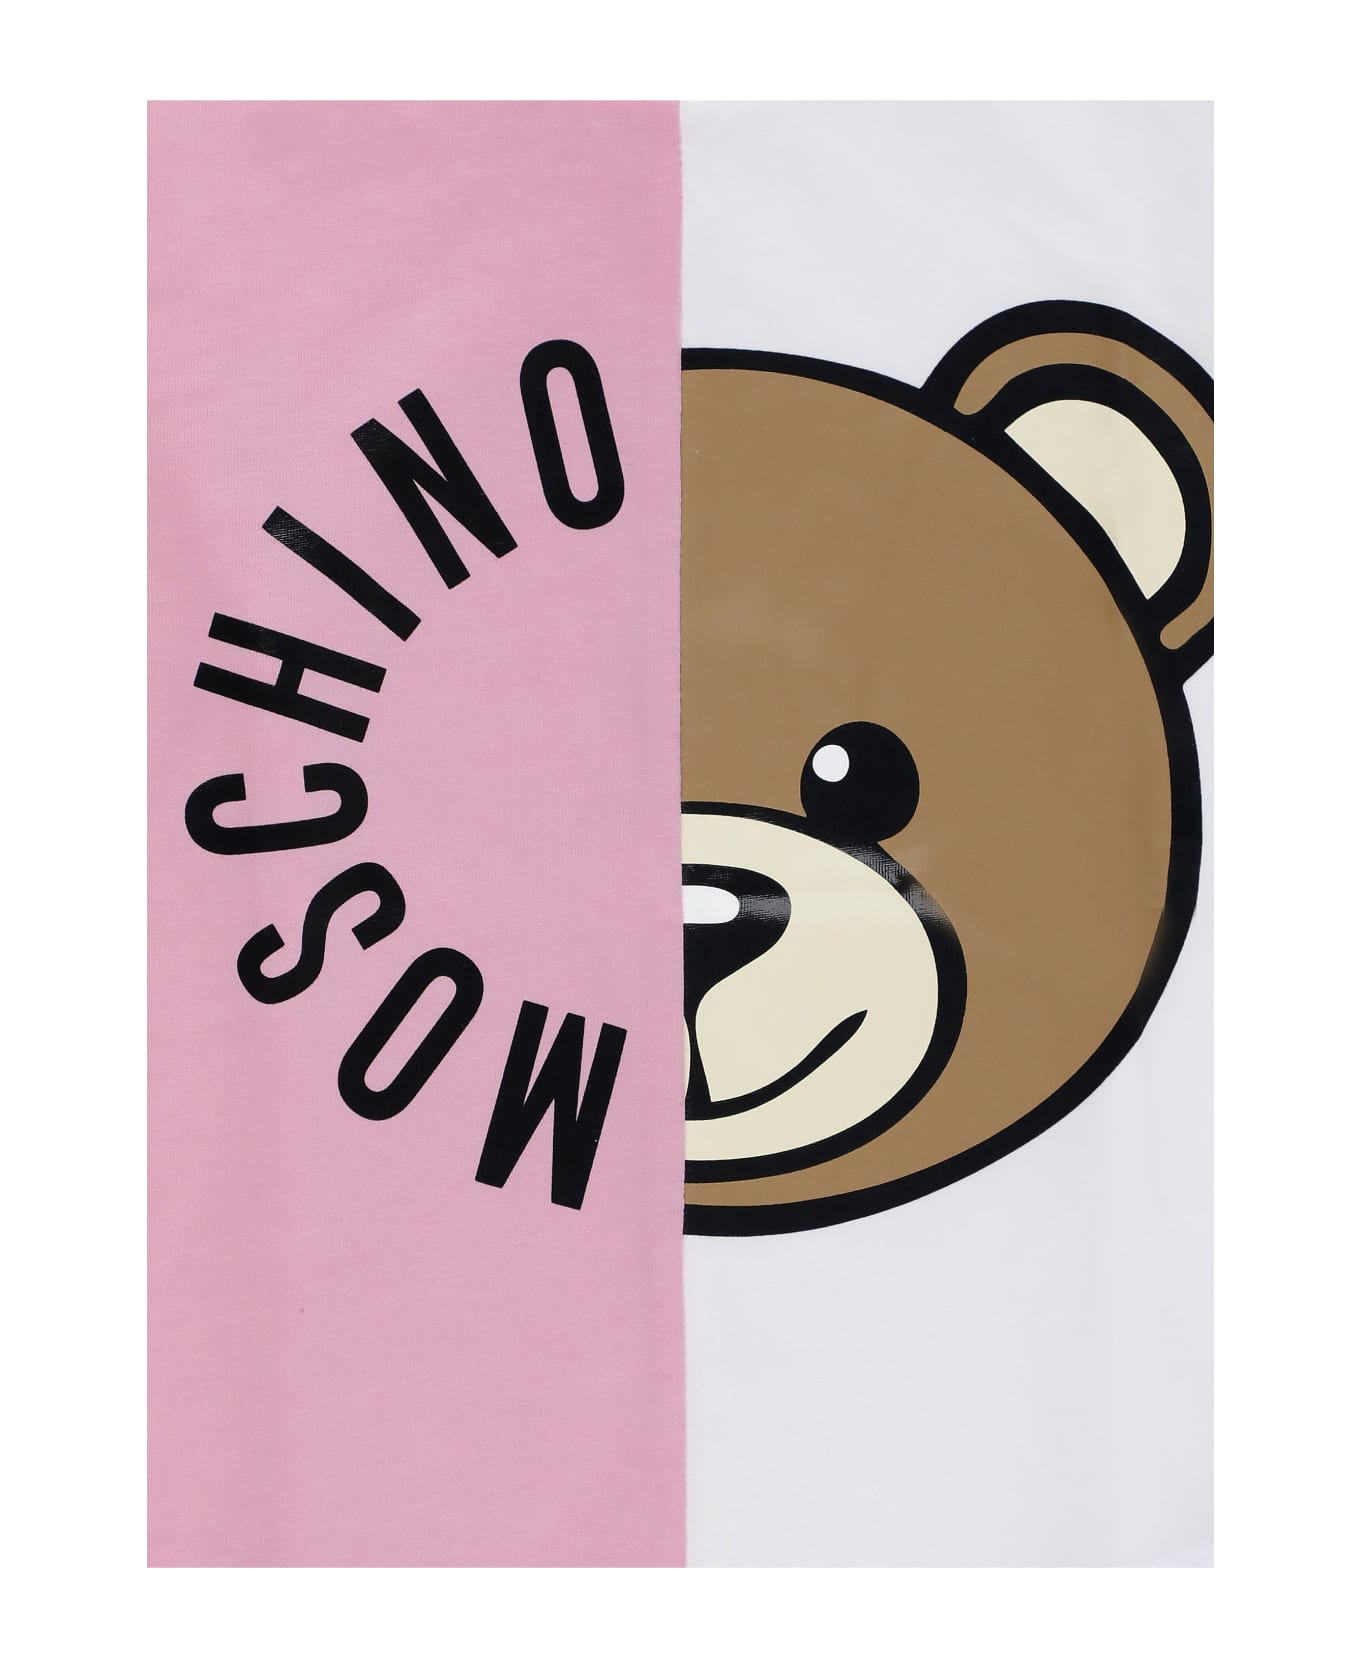 Moschino T-shirt With Print - Pink Tシャツ＆ポロシャツ